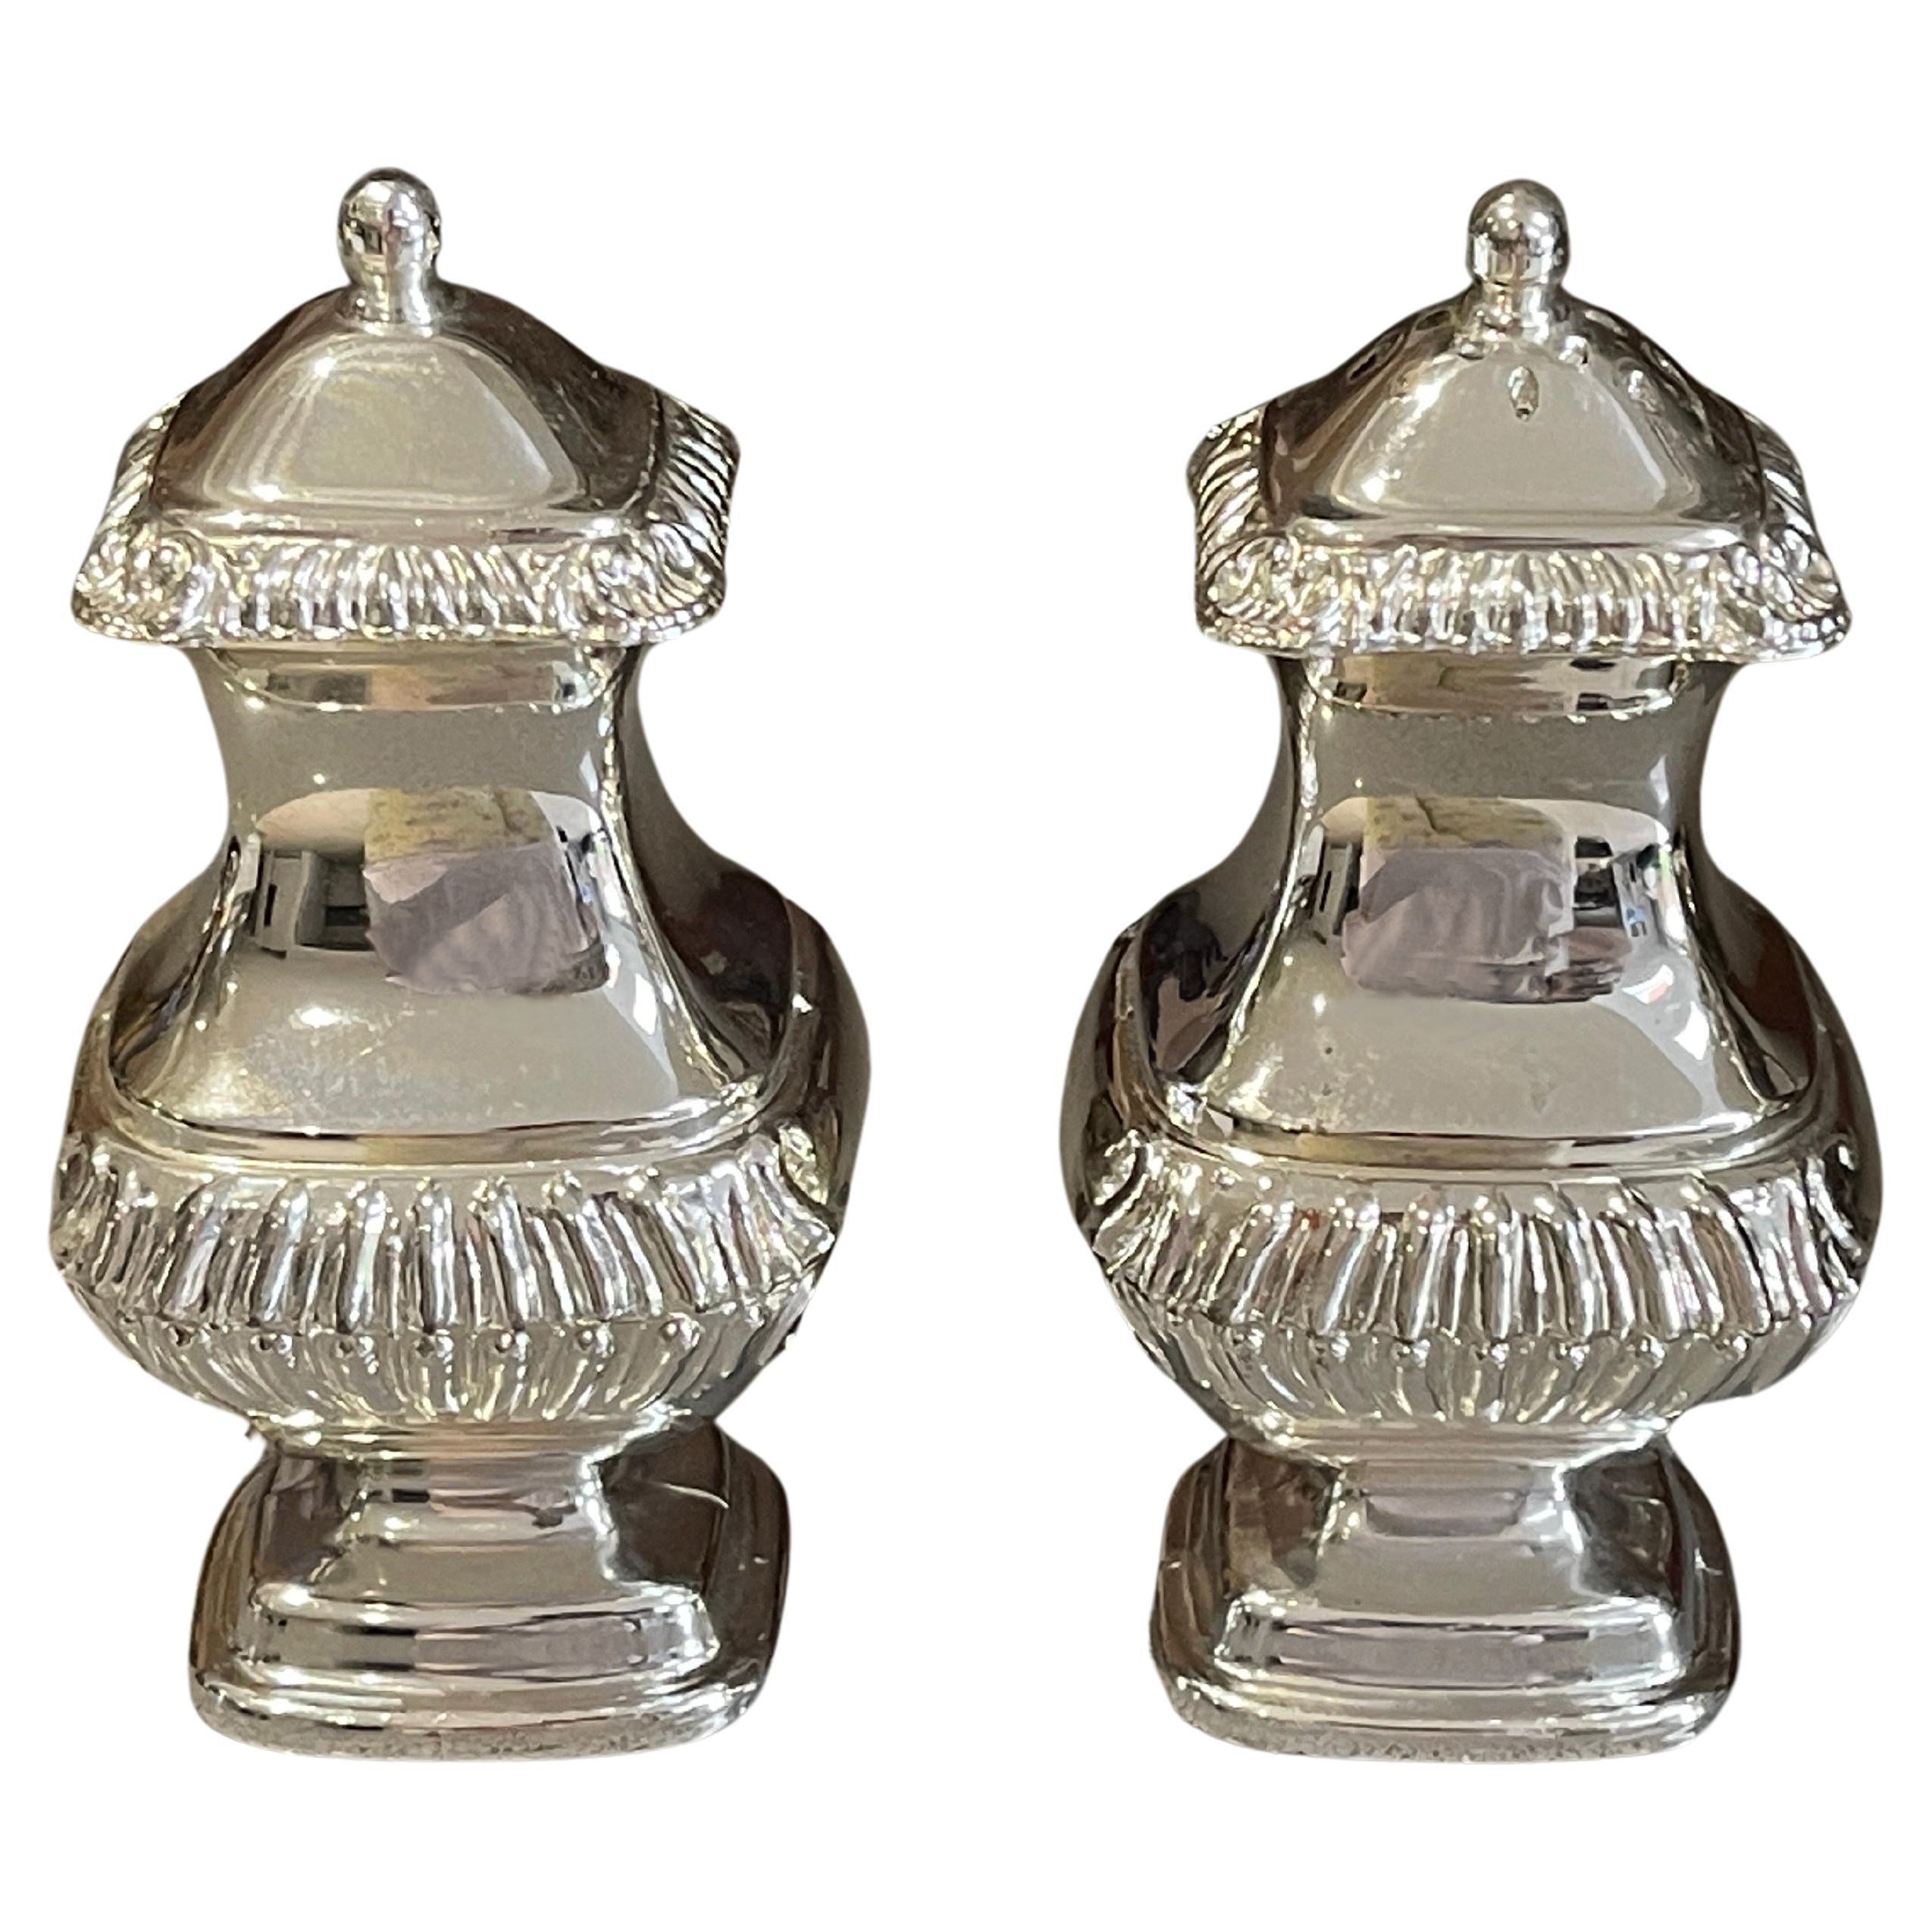 Antique Silver Salt Shaker Rococo Style, Pair of Decorative Pepper Shaker Sale 